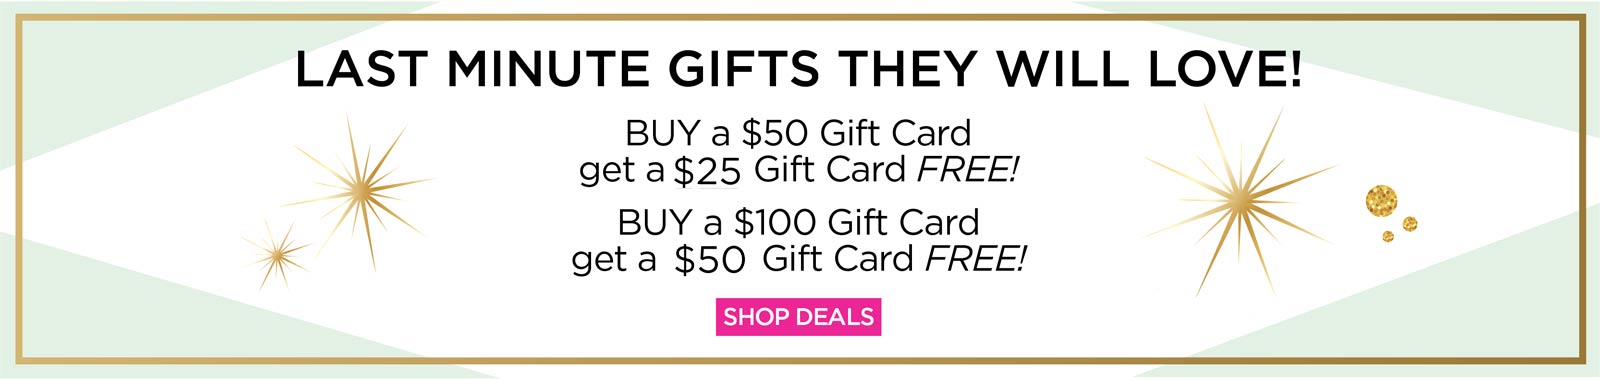 free gift card with purchase